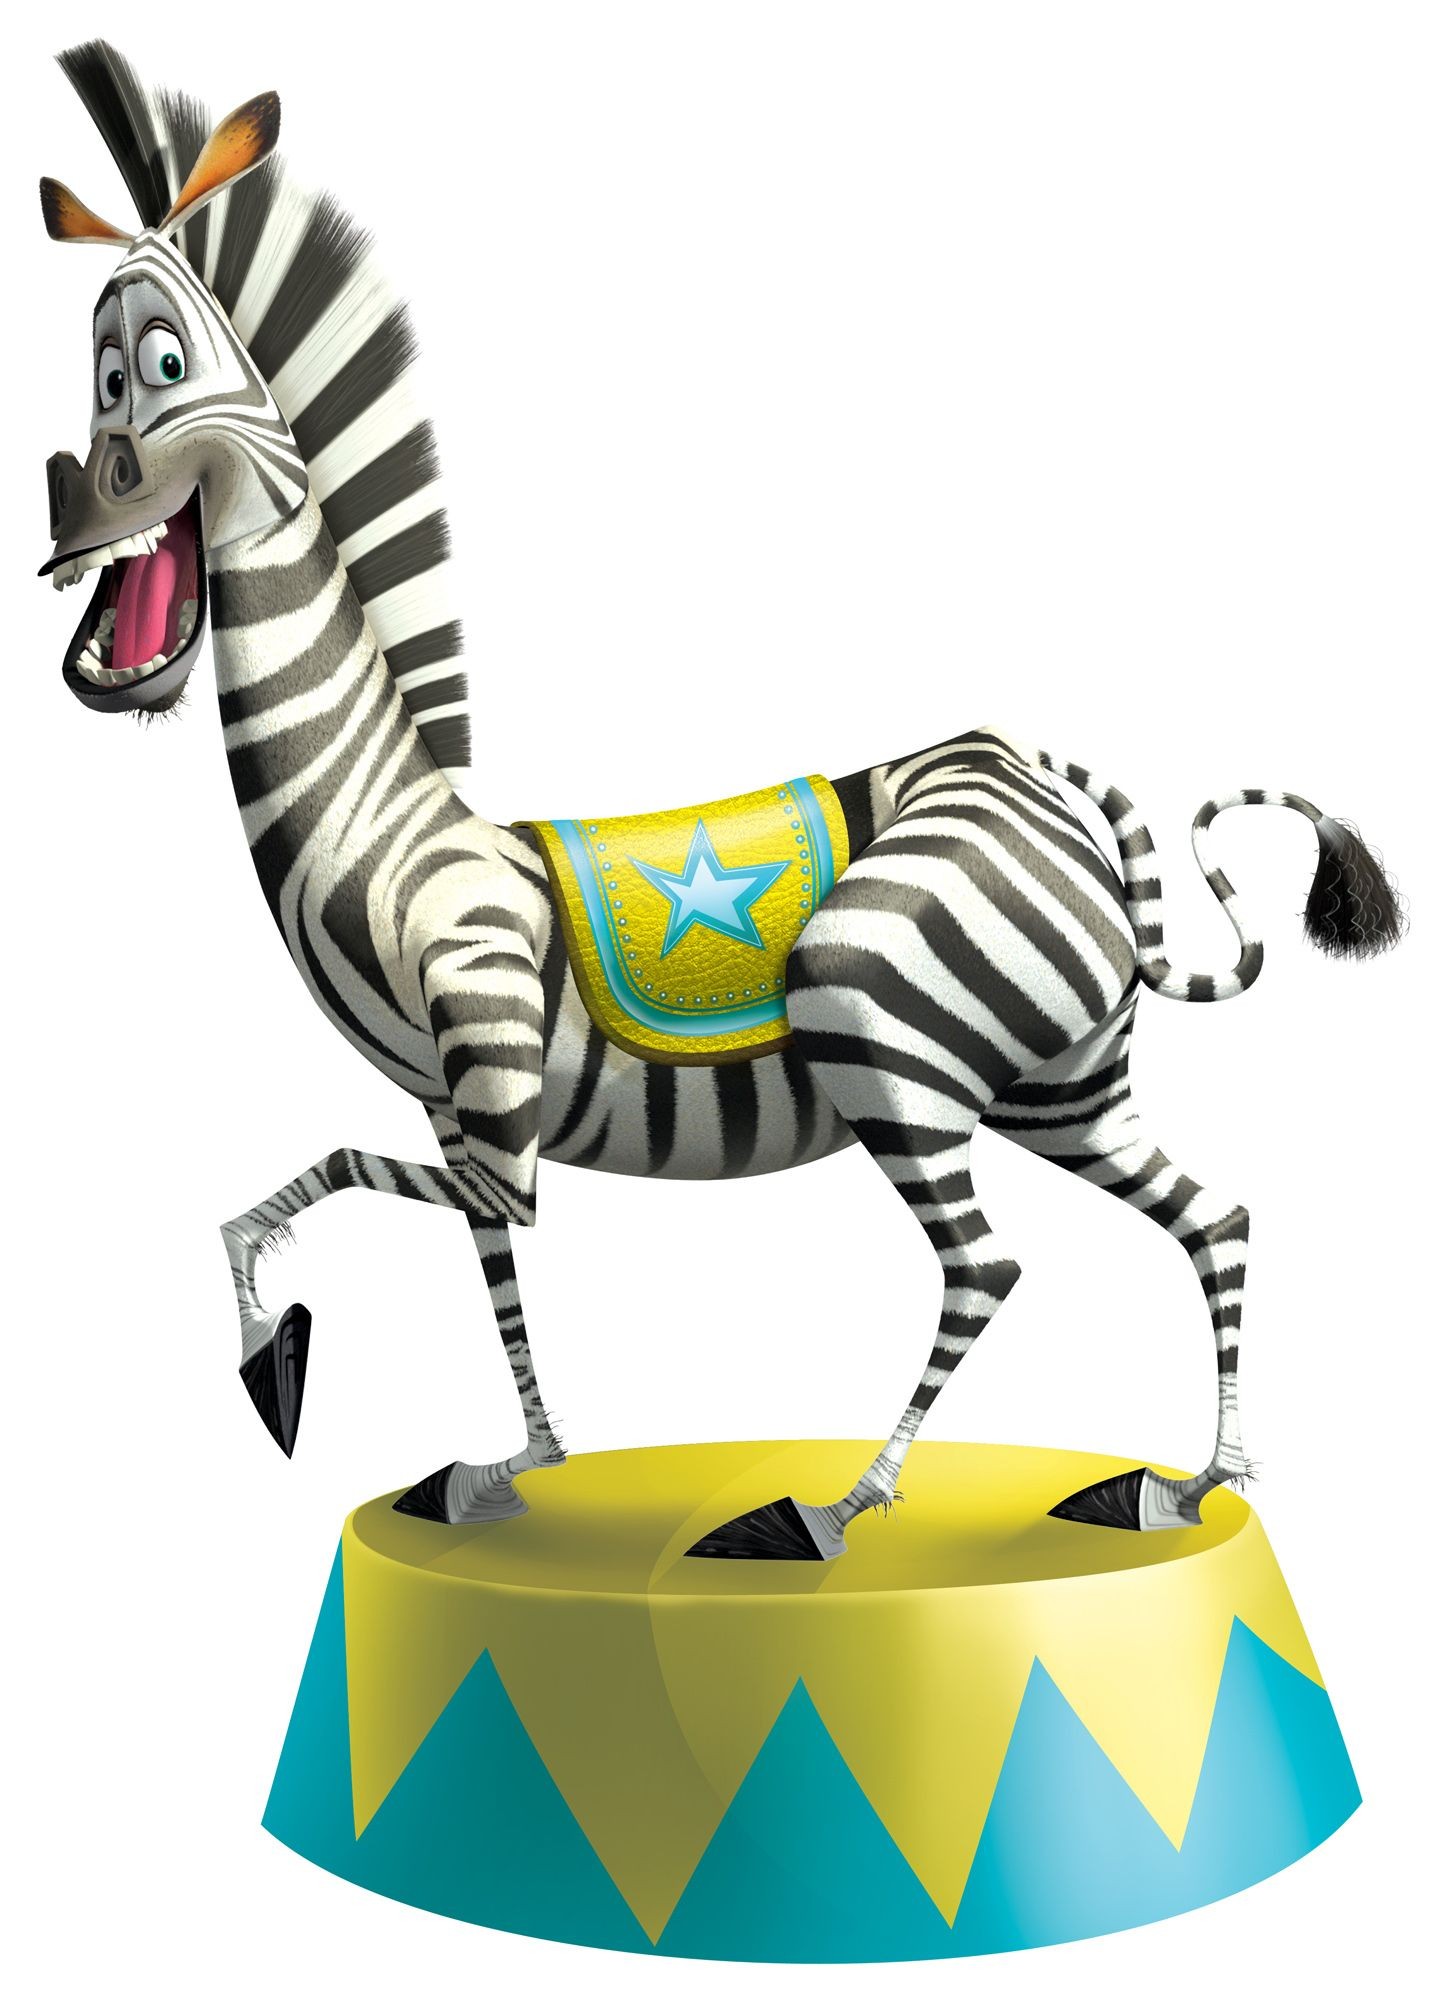 Marty the Zebra of DreamWorks Animation's Madagascar 3: Europe's Most Wanted (2012)